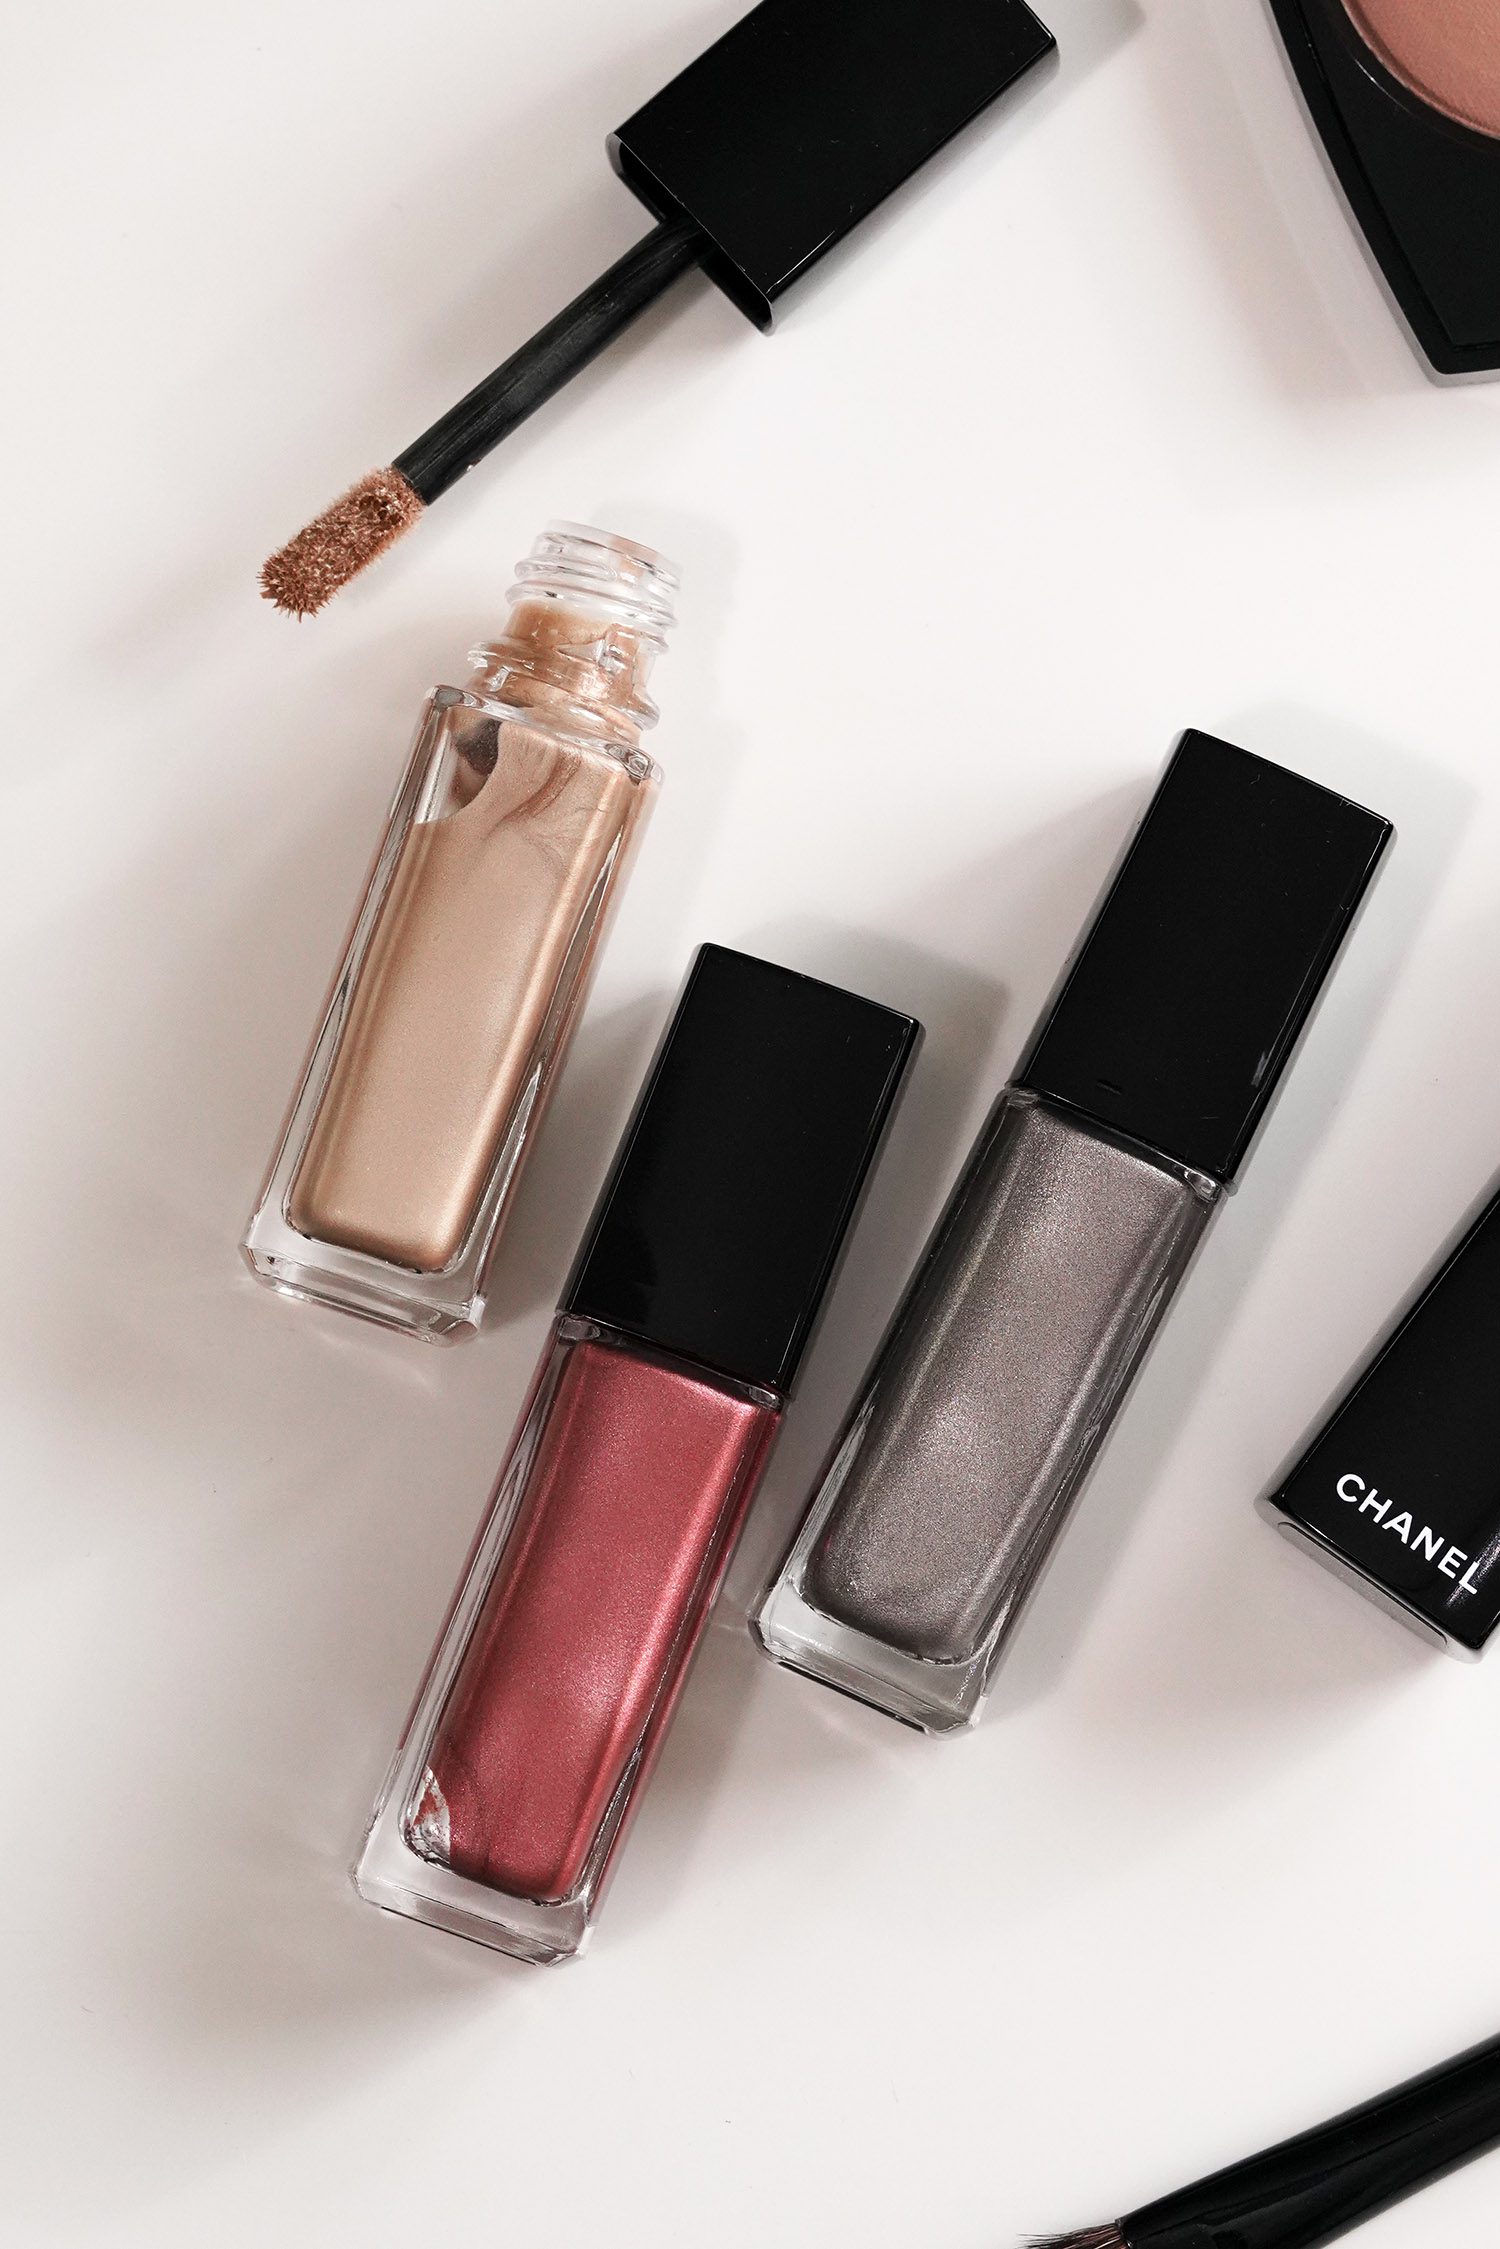 The Chanel Fall Winter Makeup Collection Launch - PureWow